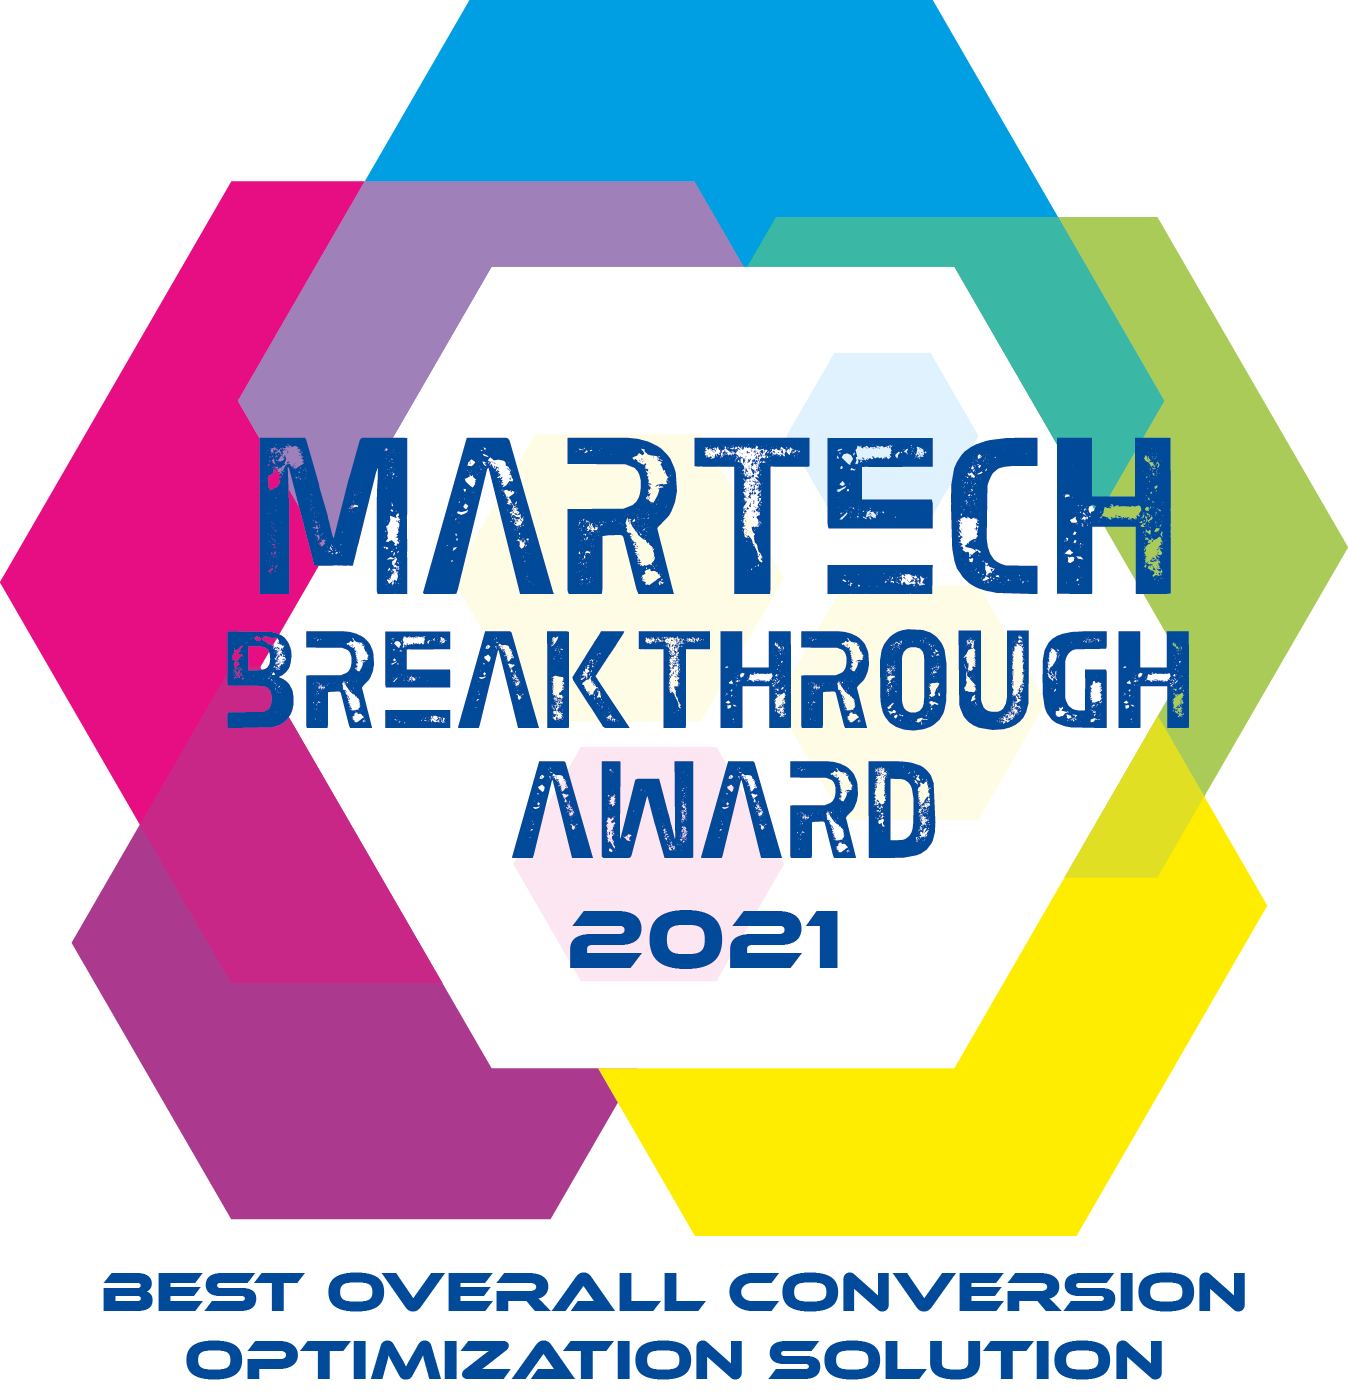 Rokt Named “Best Overall Conversion Optimization Solution” in 2021 MarTech Breakthrough Awards